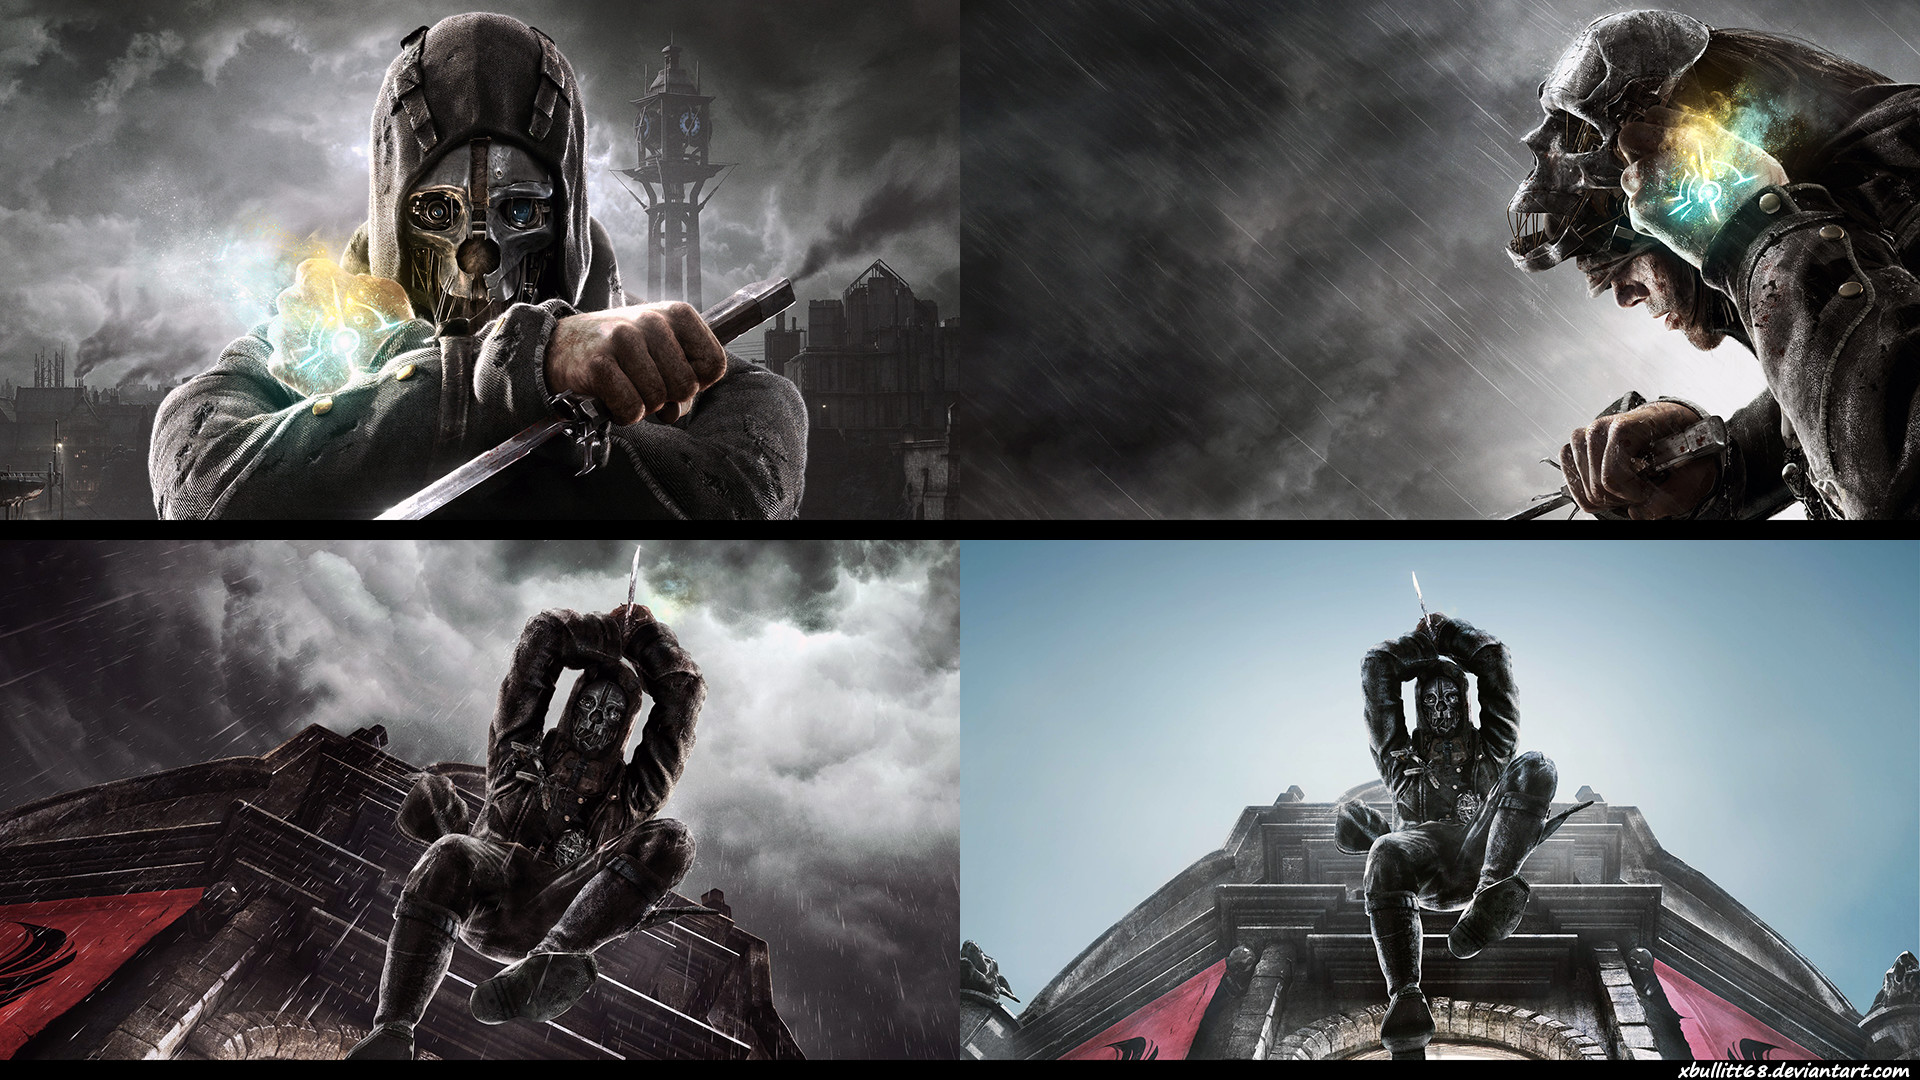 1920x1080 Dishonored Wallpapers by XBullitt68 Dishonored Wallpapers by XBullitt68